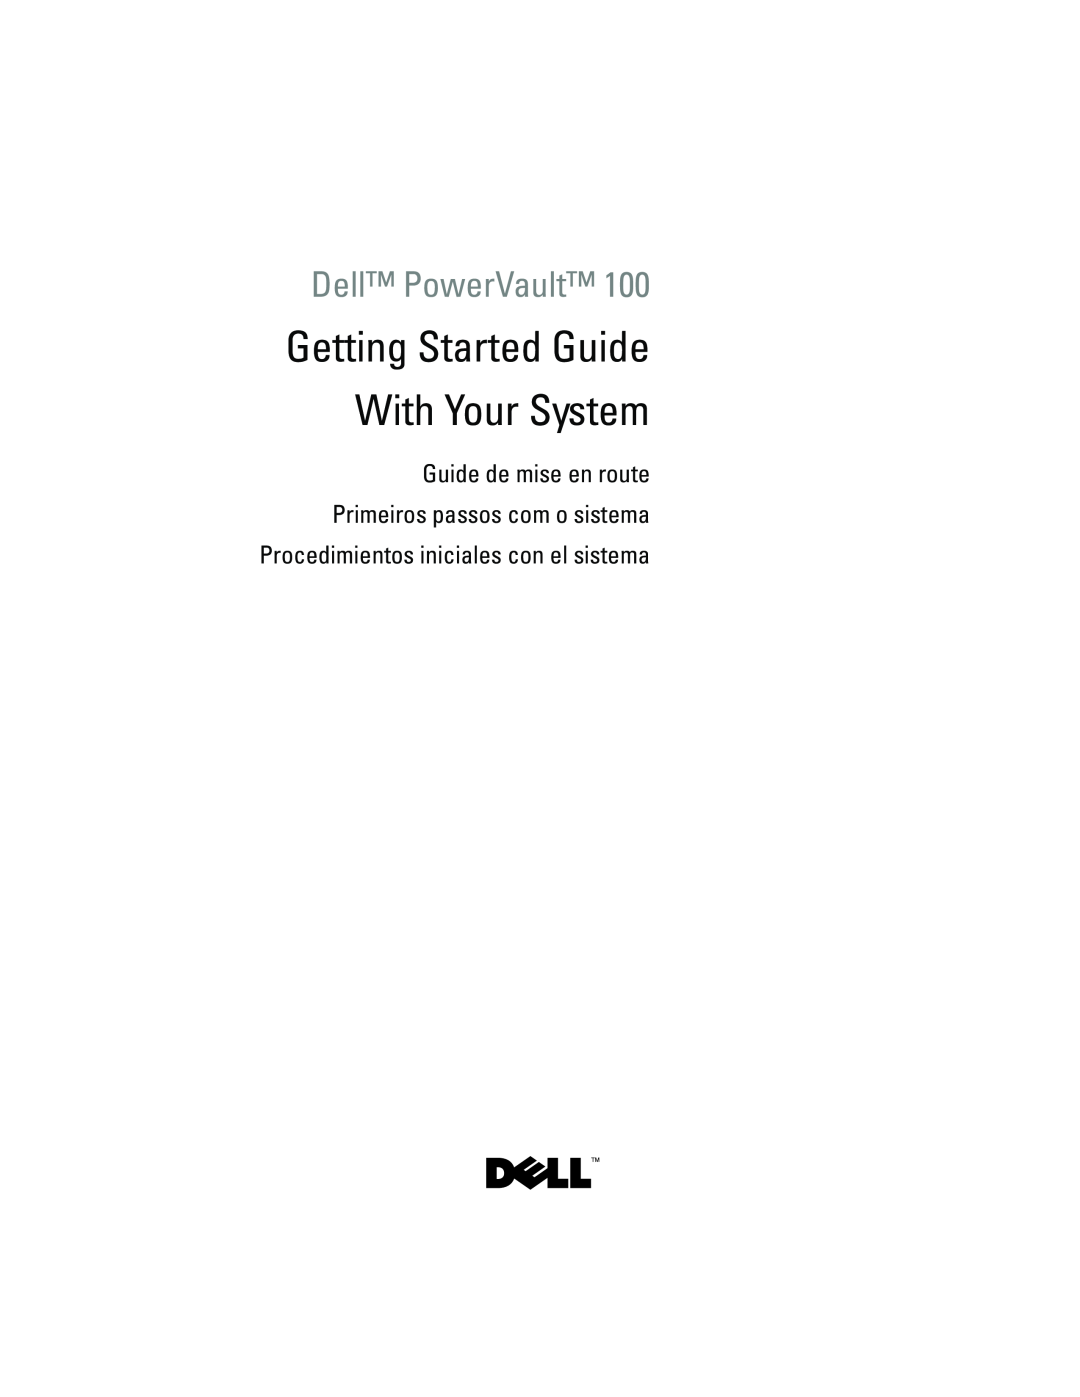 Dell manual Getting Started With Your System, Dell PowerEdge 840 Systems, Guide de mise en route, Model MVT01 